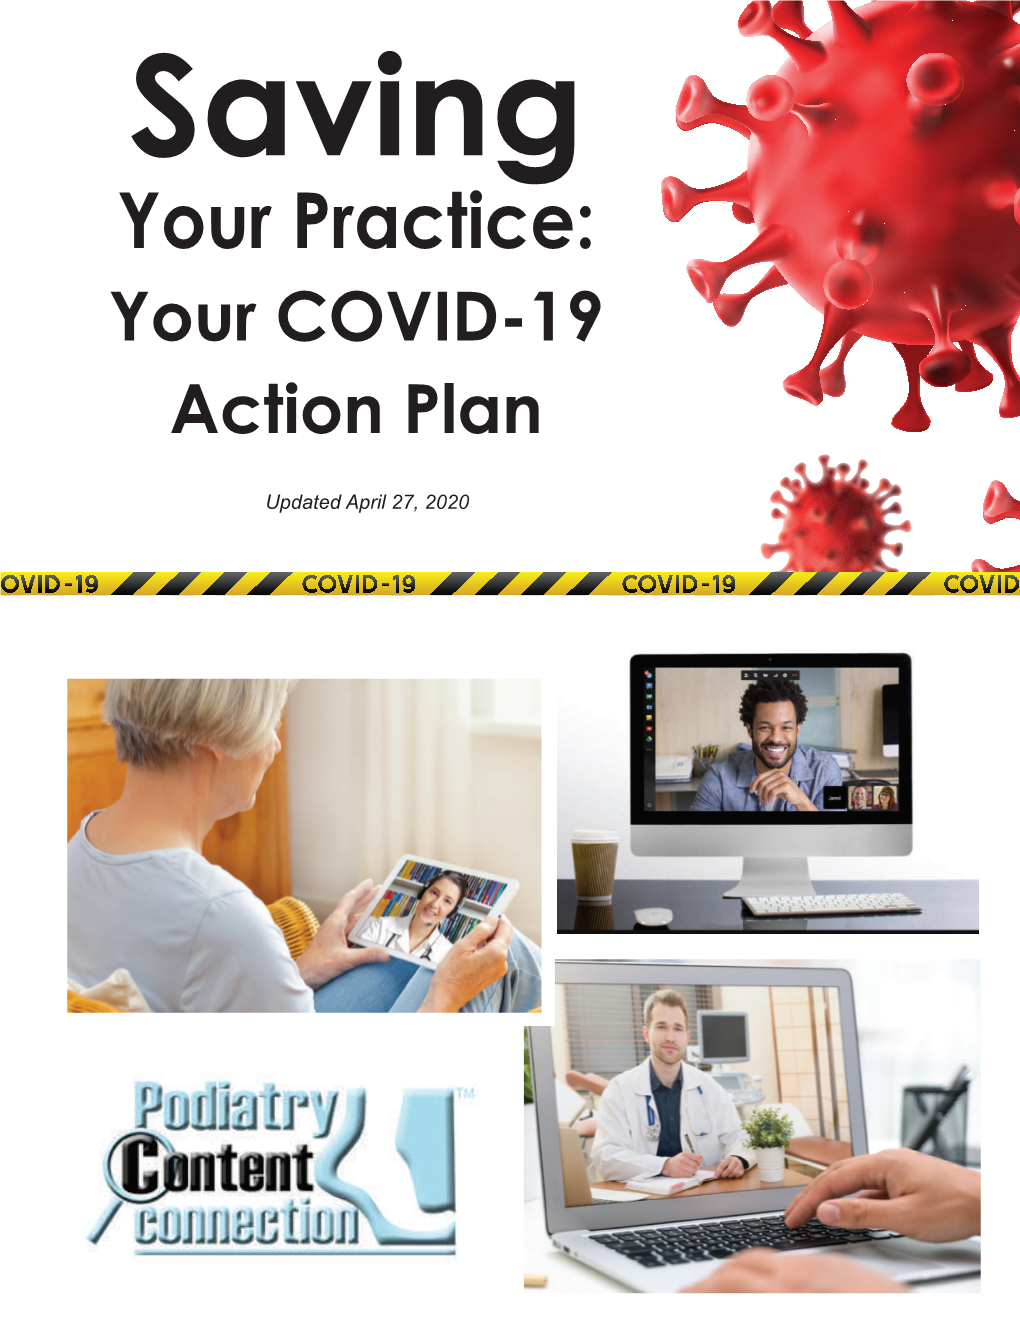 Your Practice: Your COVID-19 Action Plan